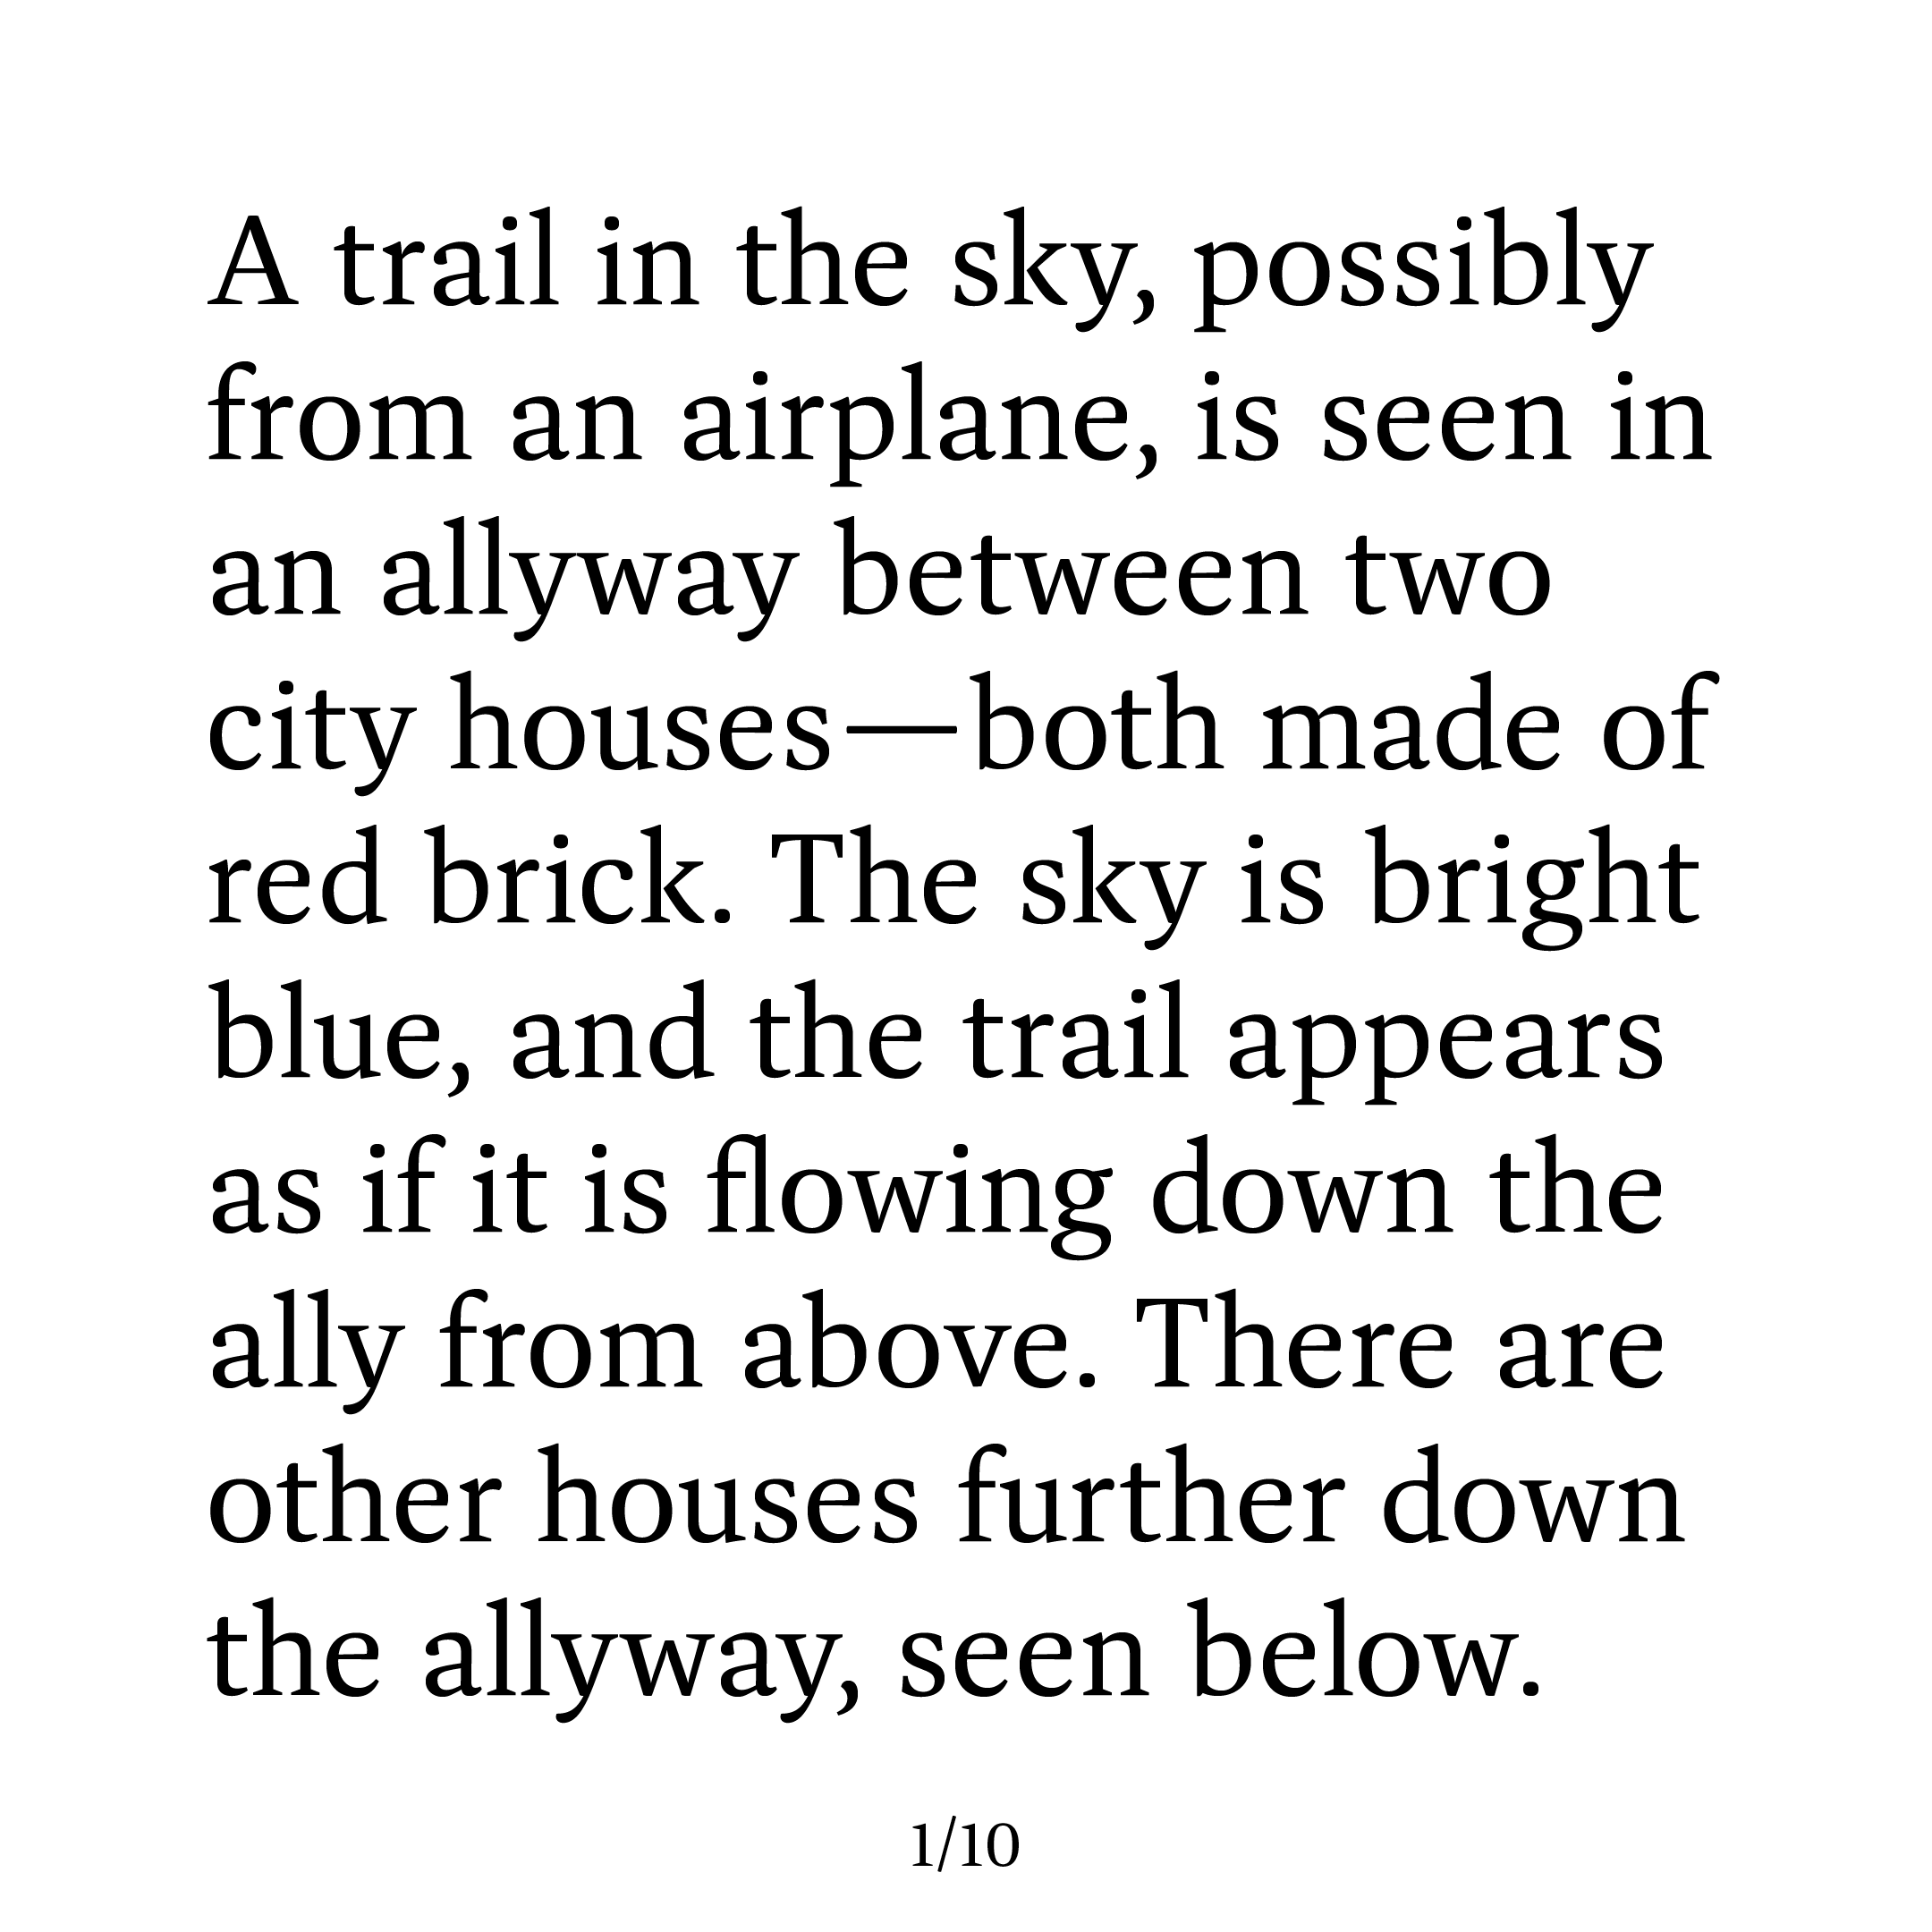 The image is simply of black text on a white background. The text says the following: “A trail in the sky, possibly from an airplane, is seen in an alleyway between two city houses—both made of red brick. The sky is bright blue, and the trail appears as if it is flowing down the path from above. There are other houses further down the alleyway, seen below.”